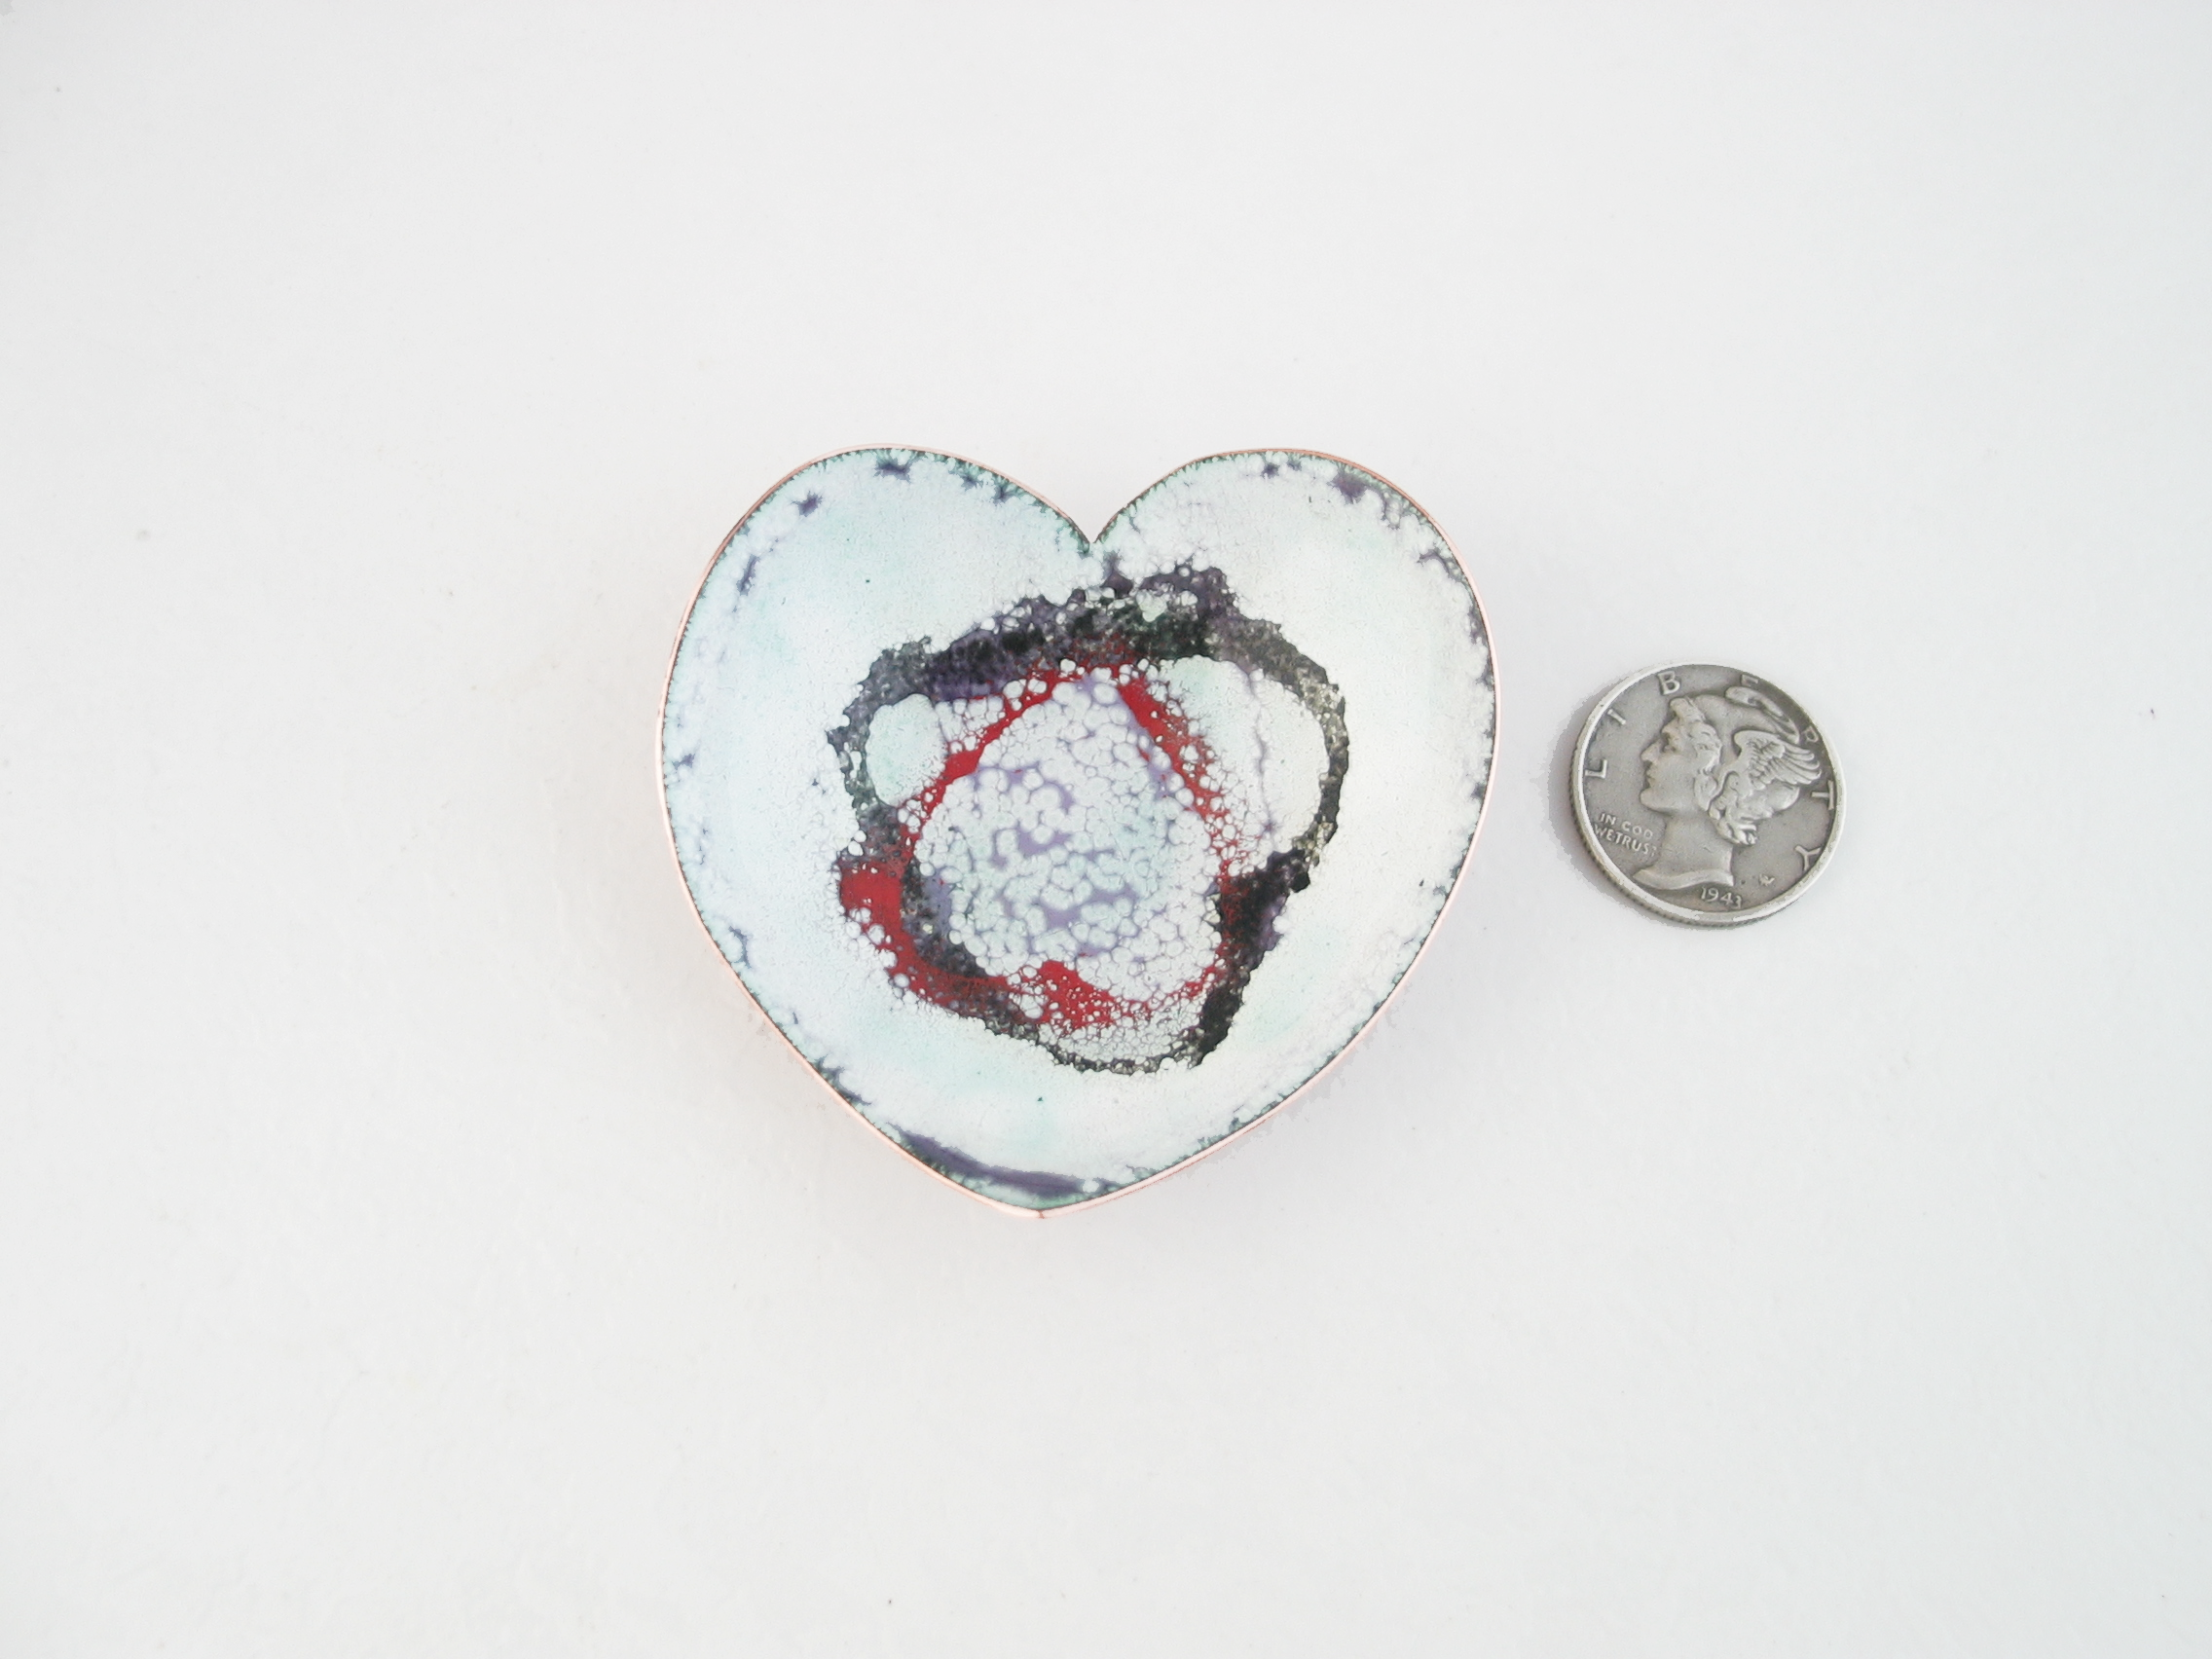 heart shaped copper enameled trinket ring dish with black and red hearts stenciled on shite, verdigris, purple